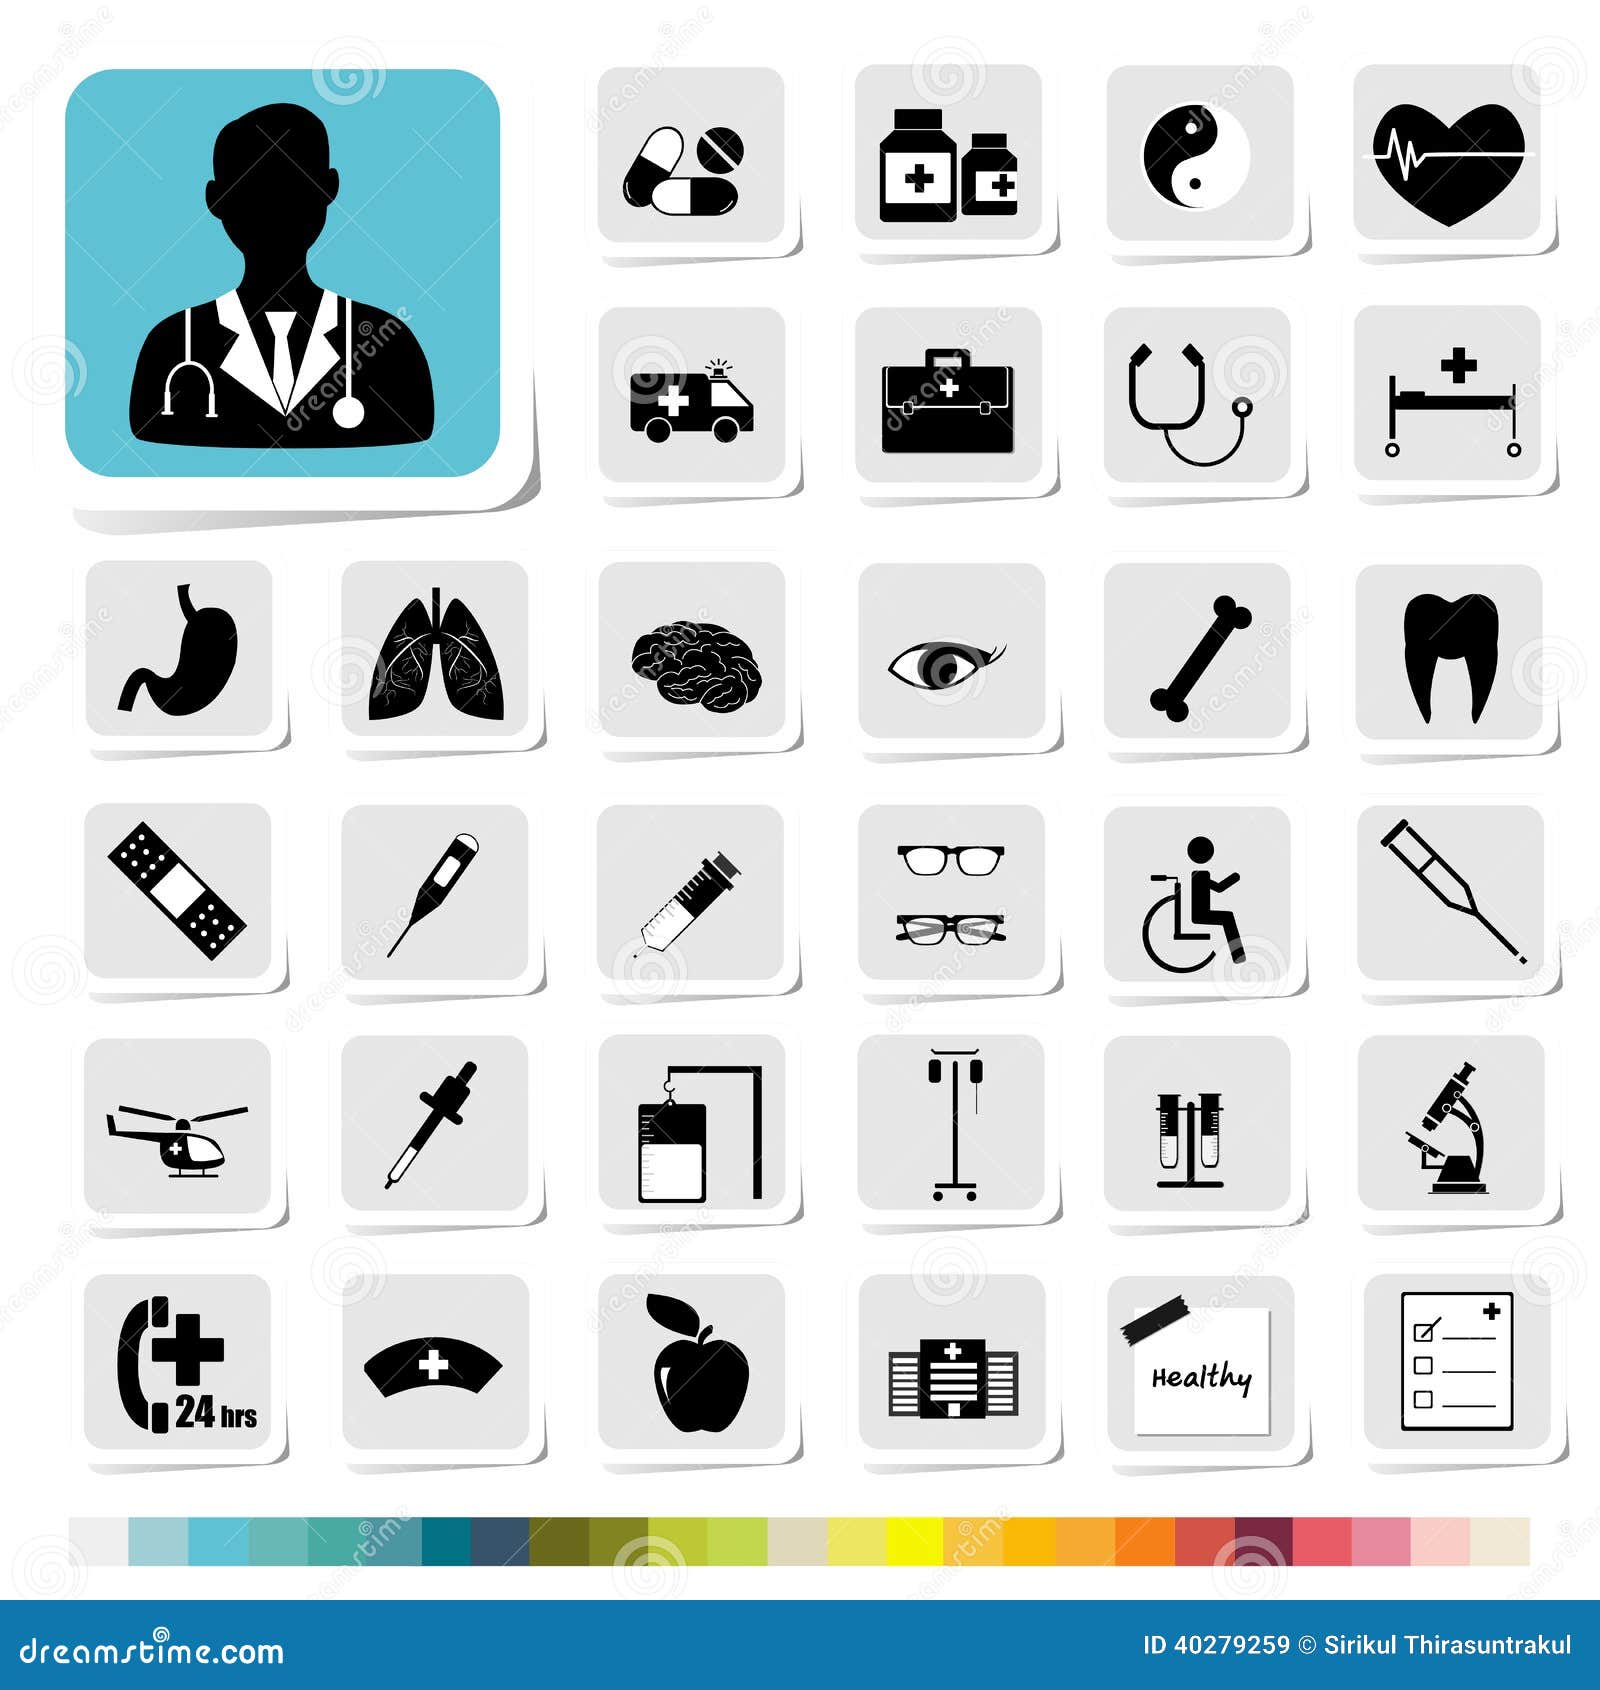 healthcare and medical icon for business category concept